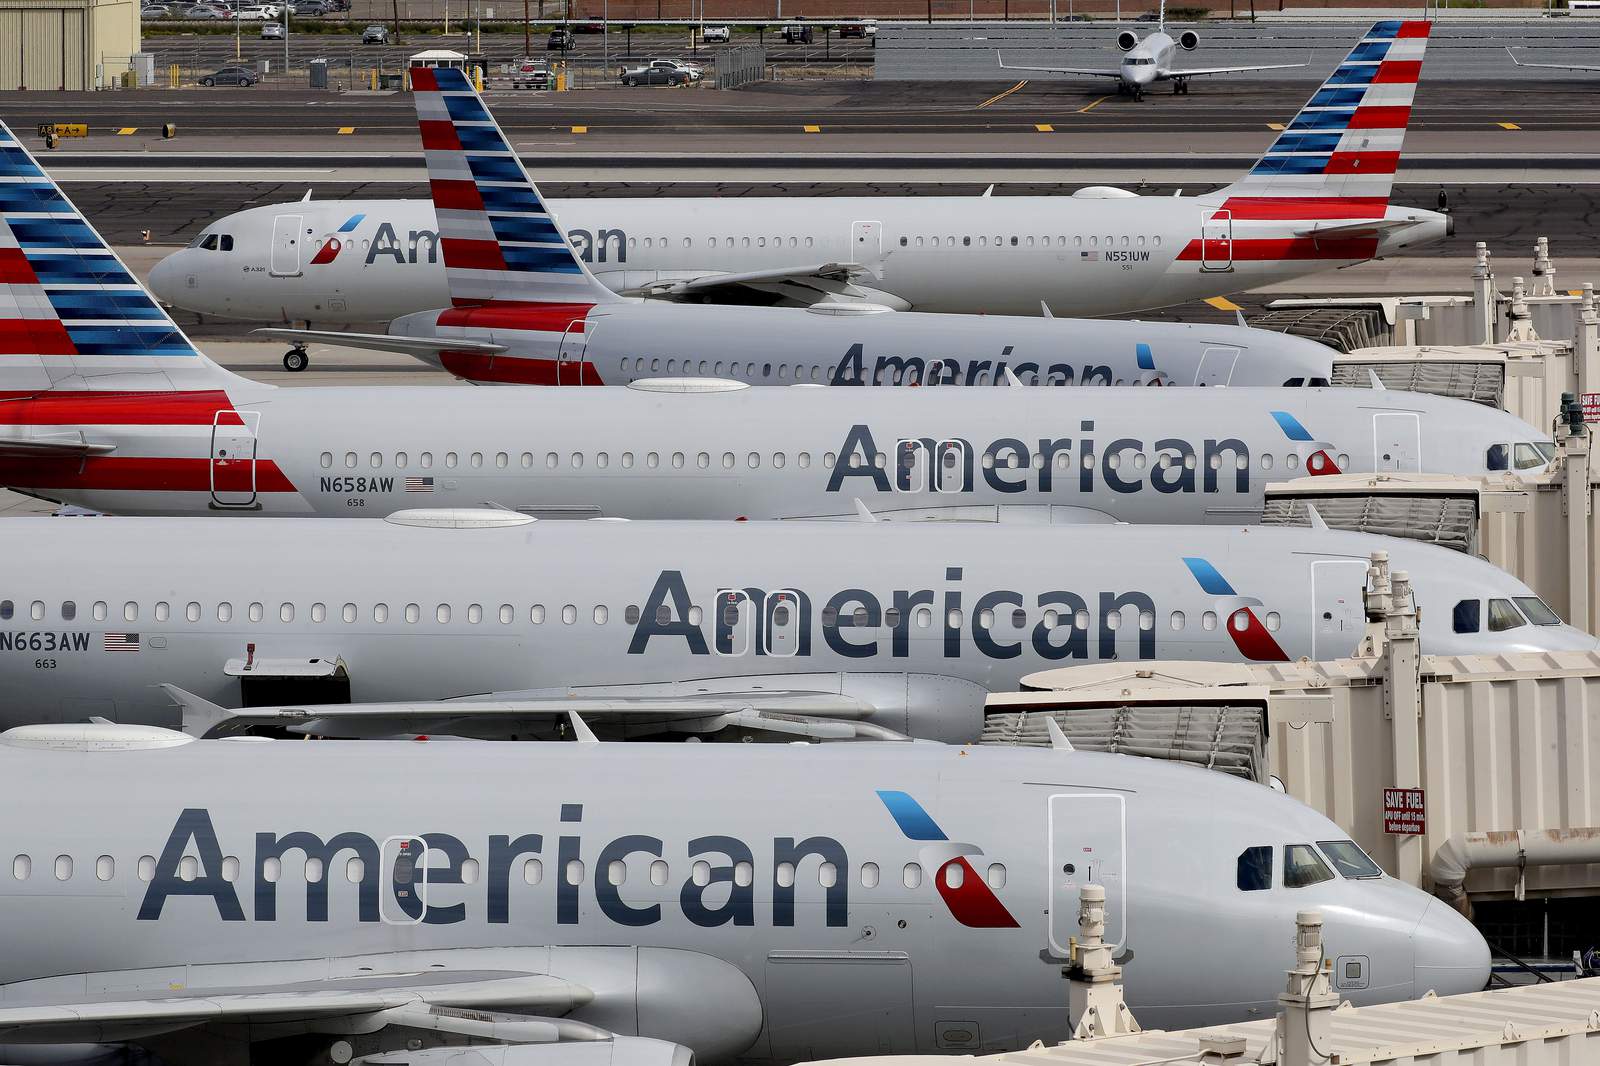 American Airlines plans 19,000 furloughs, layoffs in October